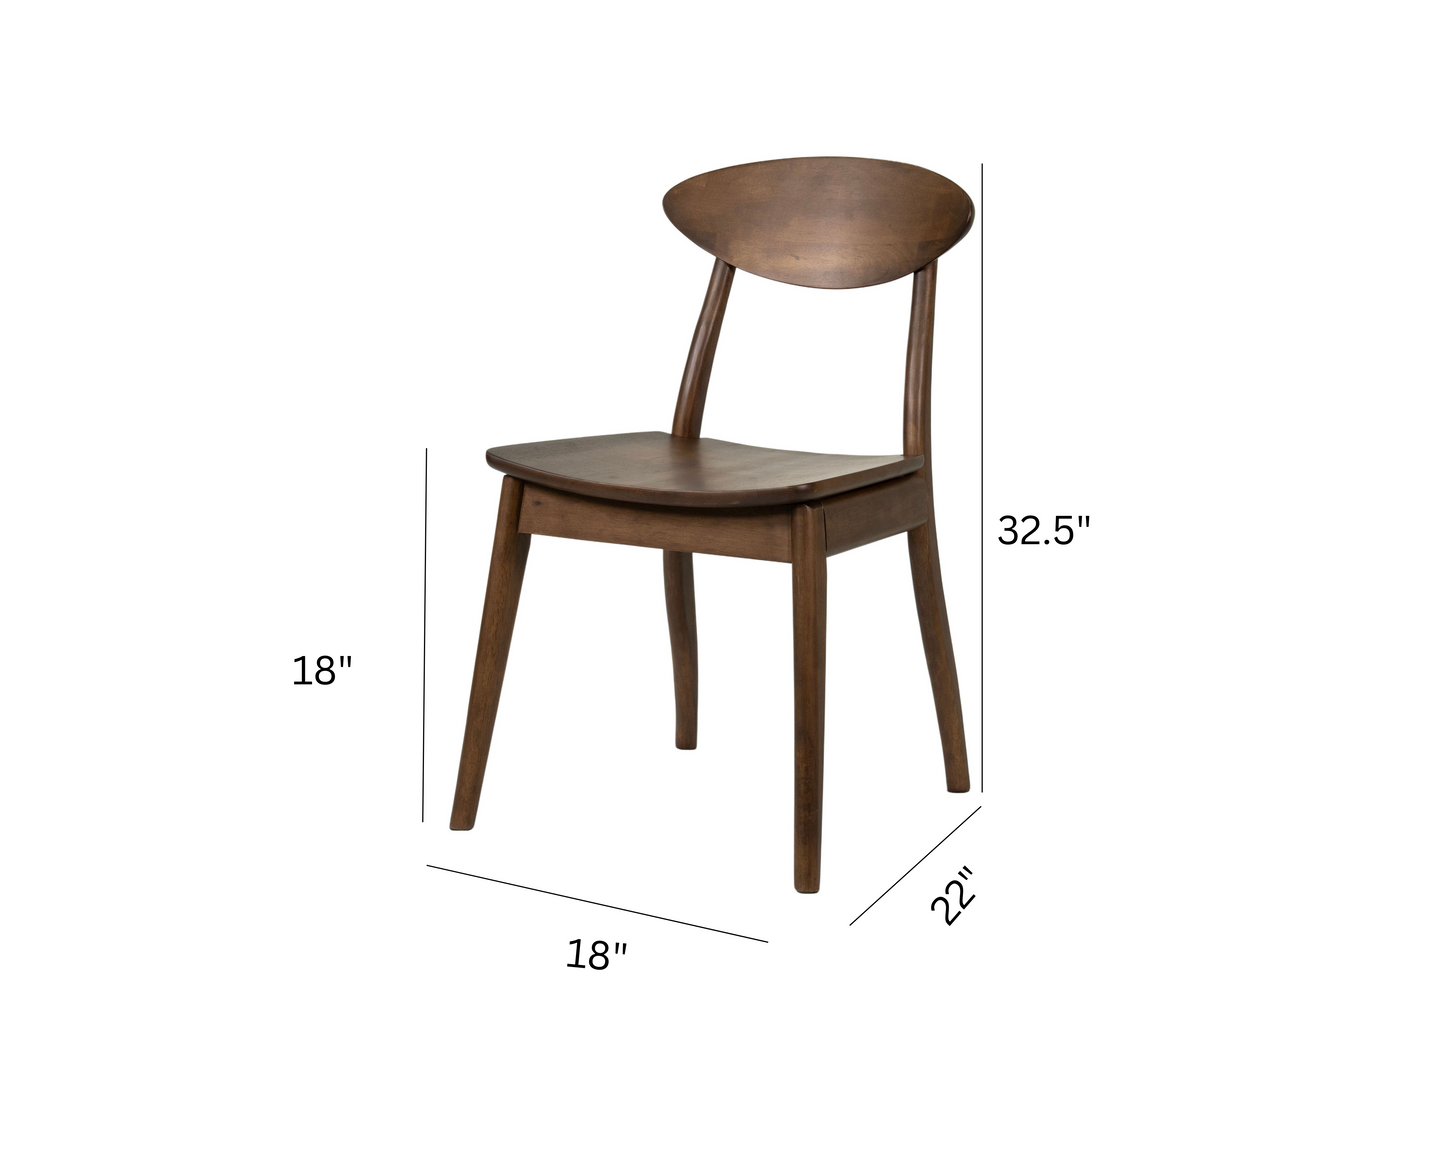 Gala Dining Chairs (Set of 2)